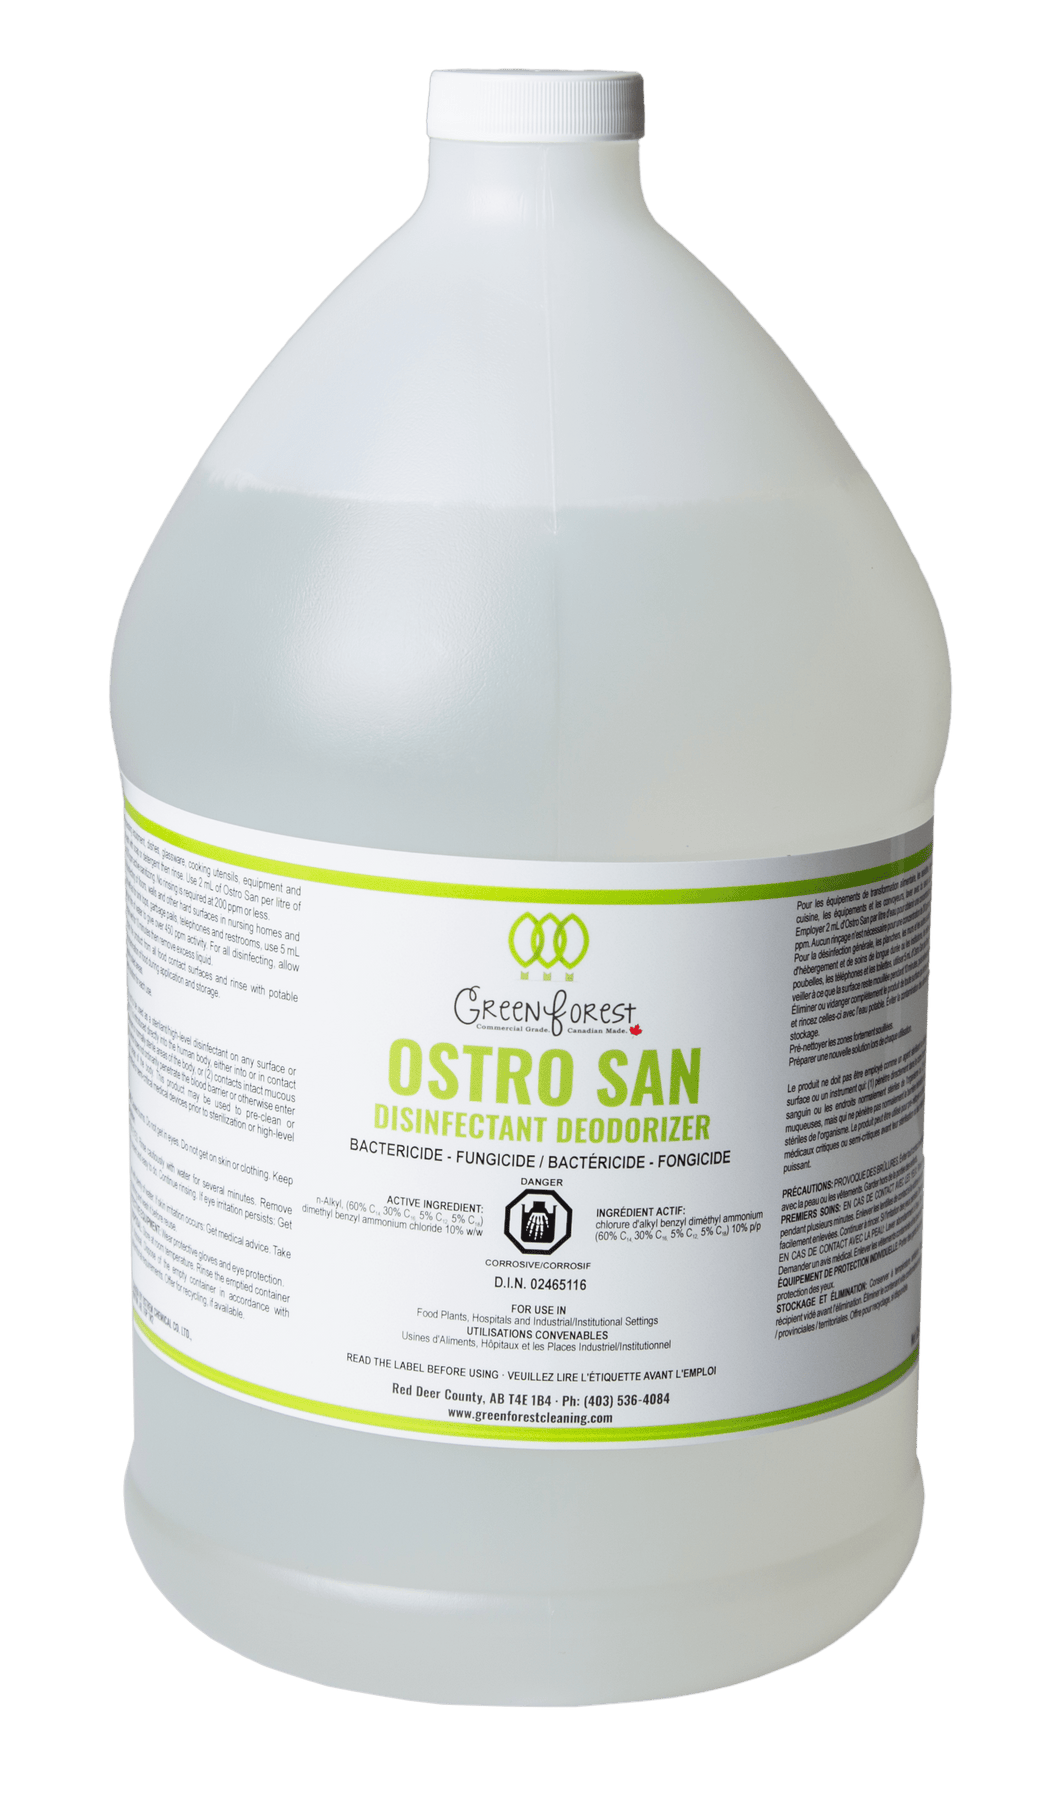 *DIN# Ostro San Commercial Disinfectant Concentrate - 4L Jug - Green Forest Cleaning